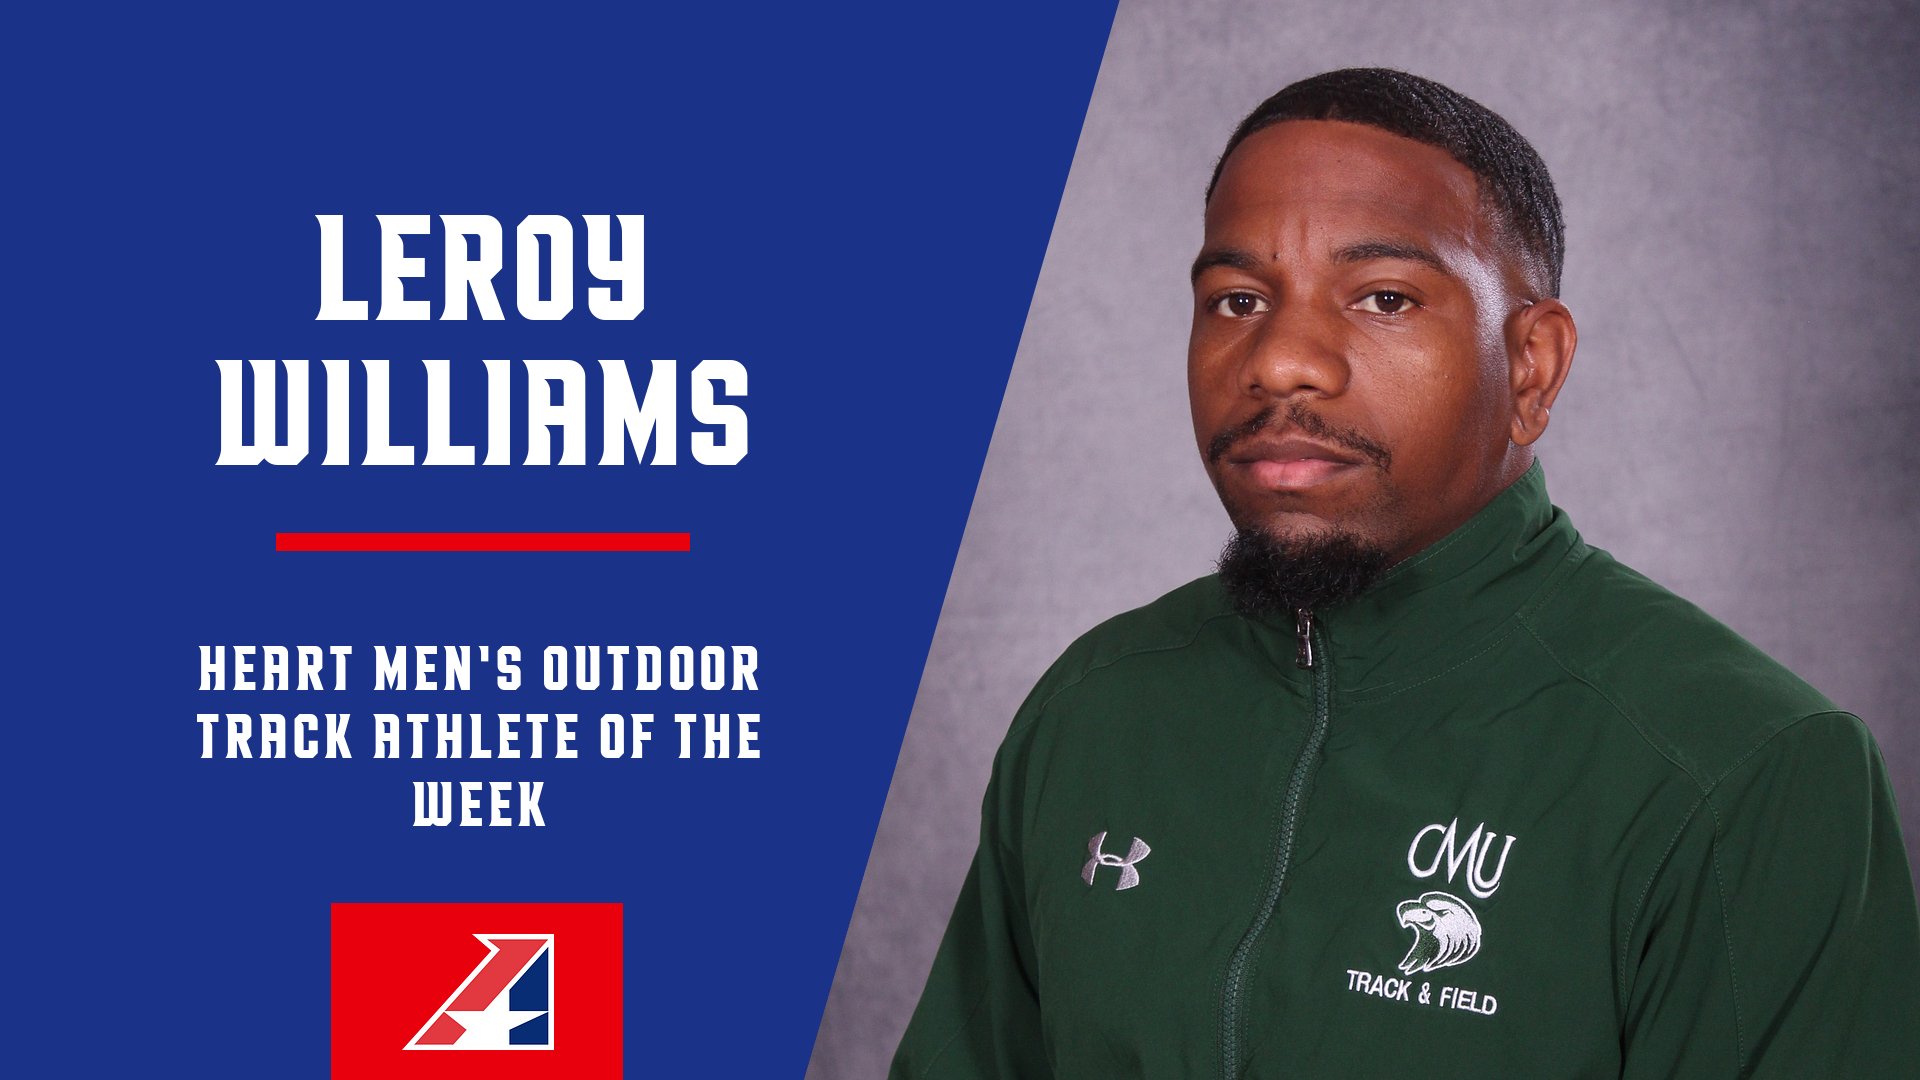 Williams Tabbed as Heart Men's Outdoor Track Athlete of the Week